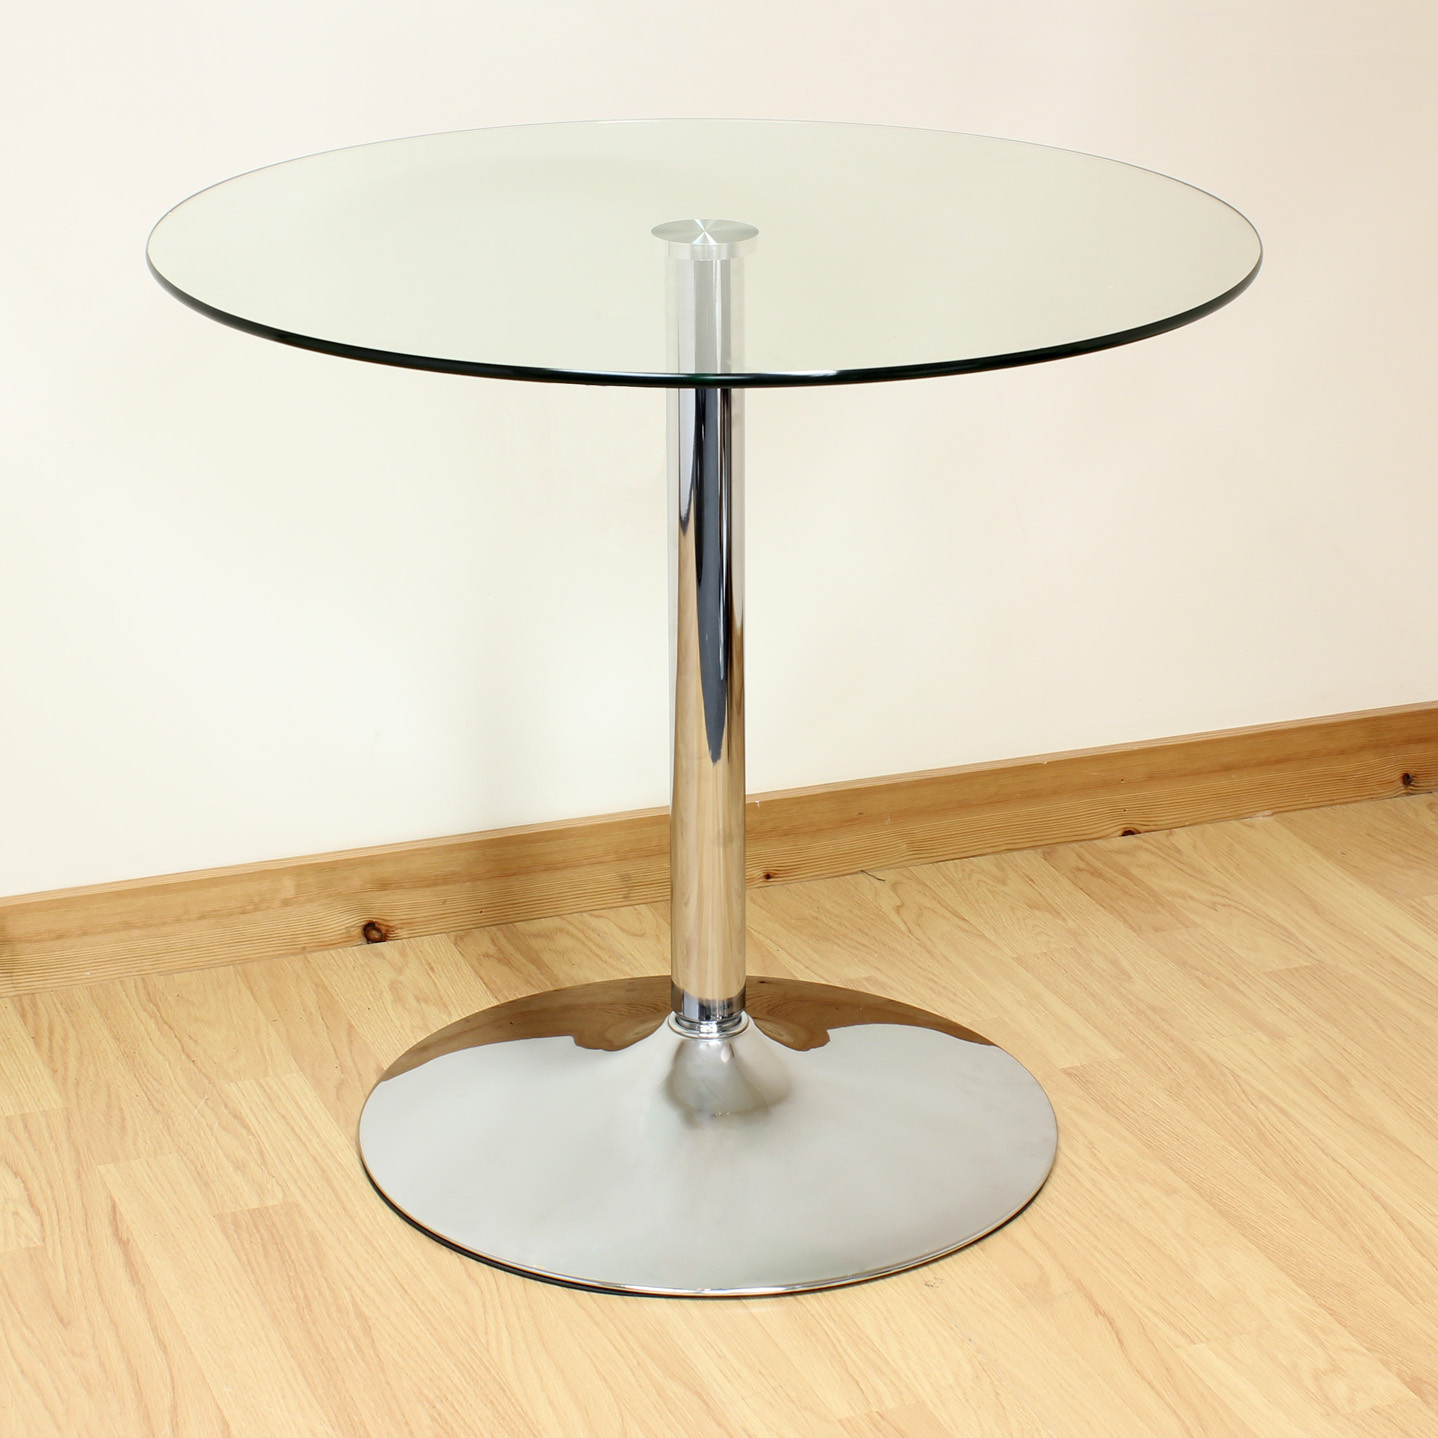 Small Glass Kitchen Table
 Hartleys 80cm Clear Chrome Round Glass Dining Kitchen